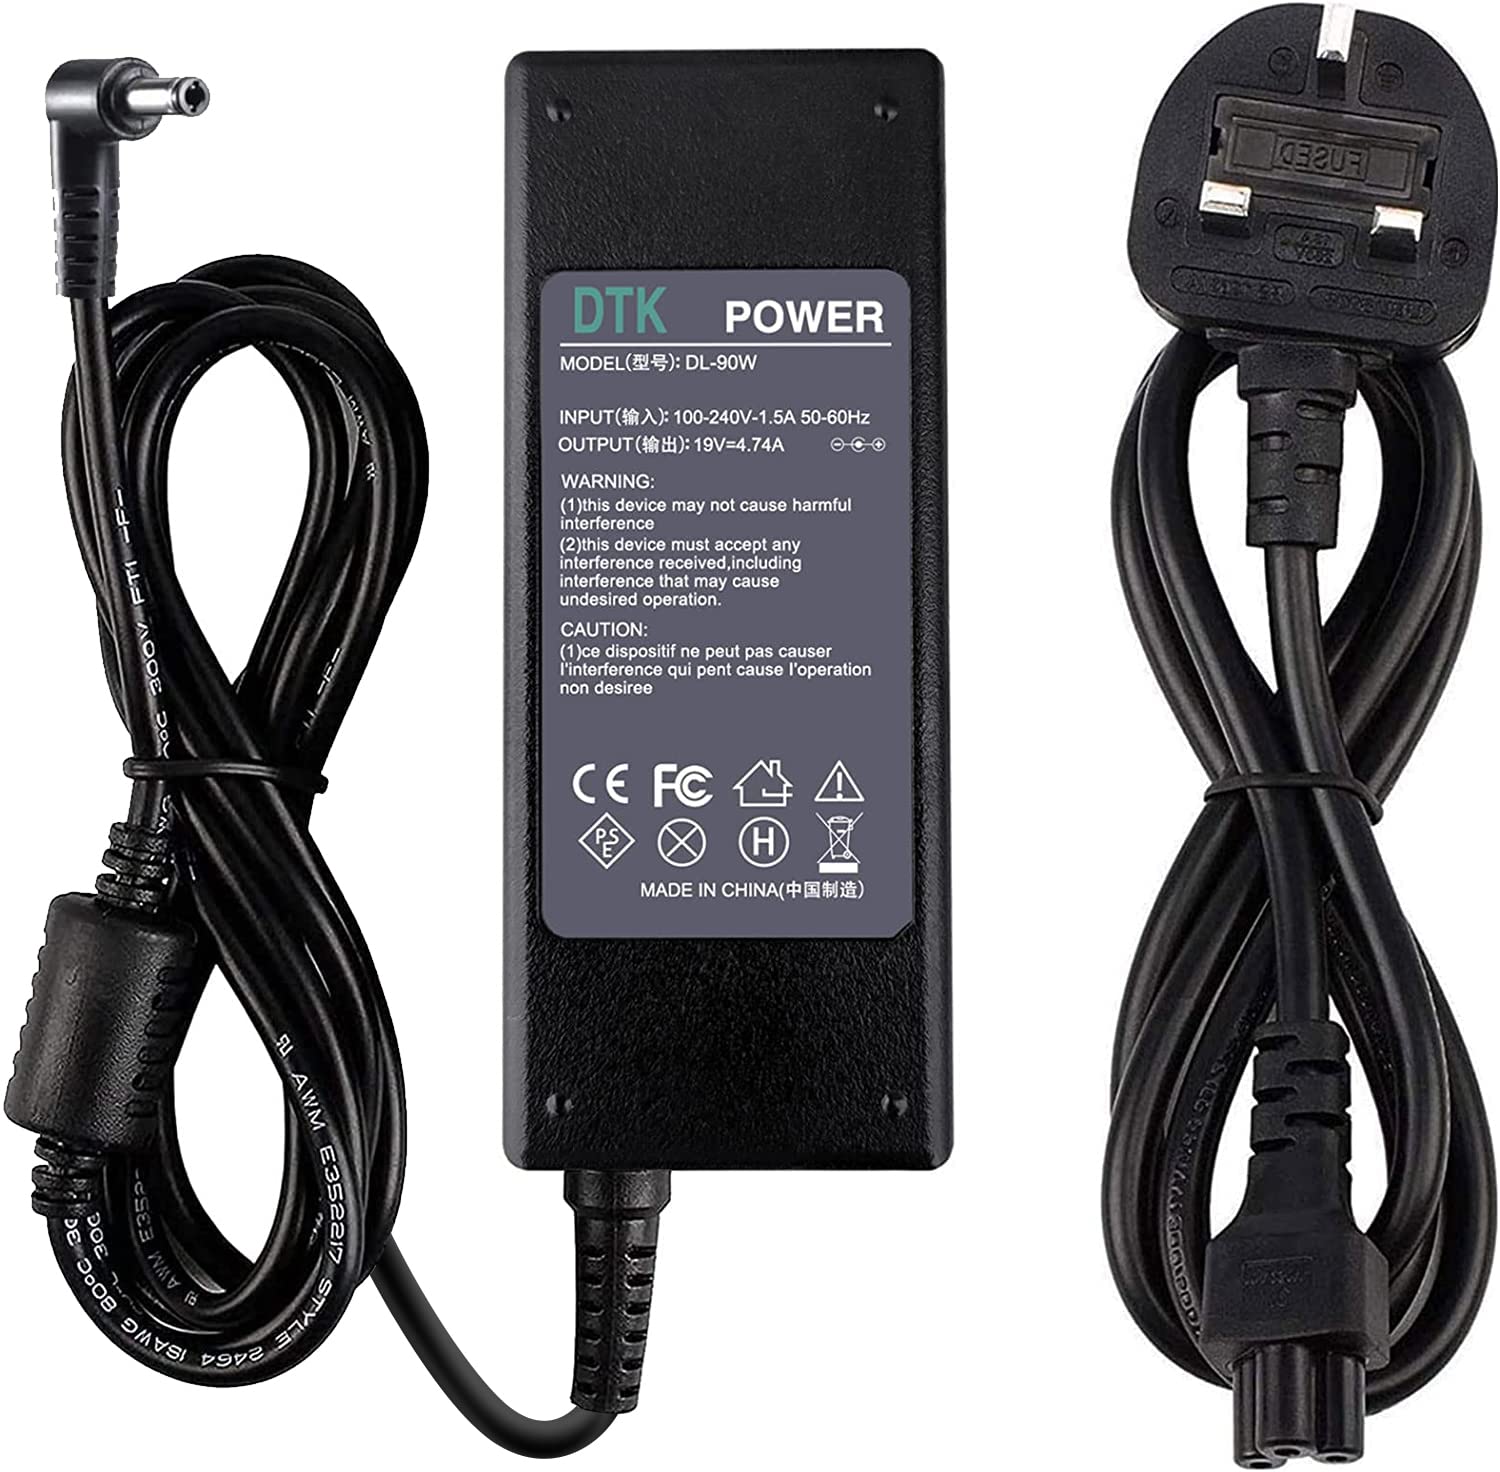 Laptop charger and power source